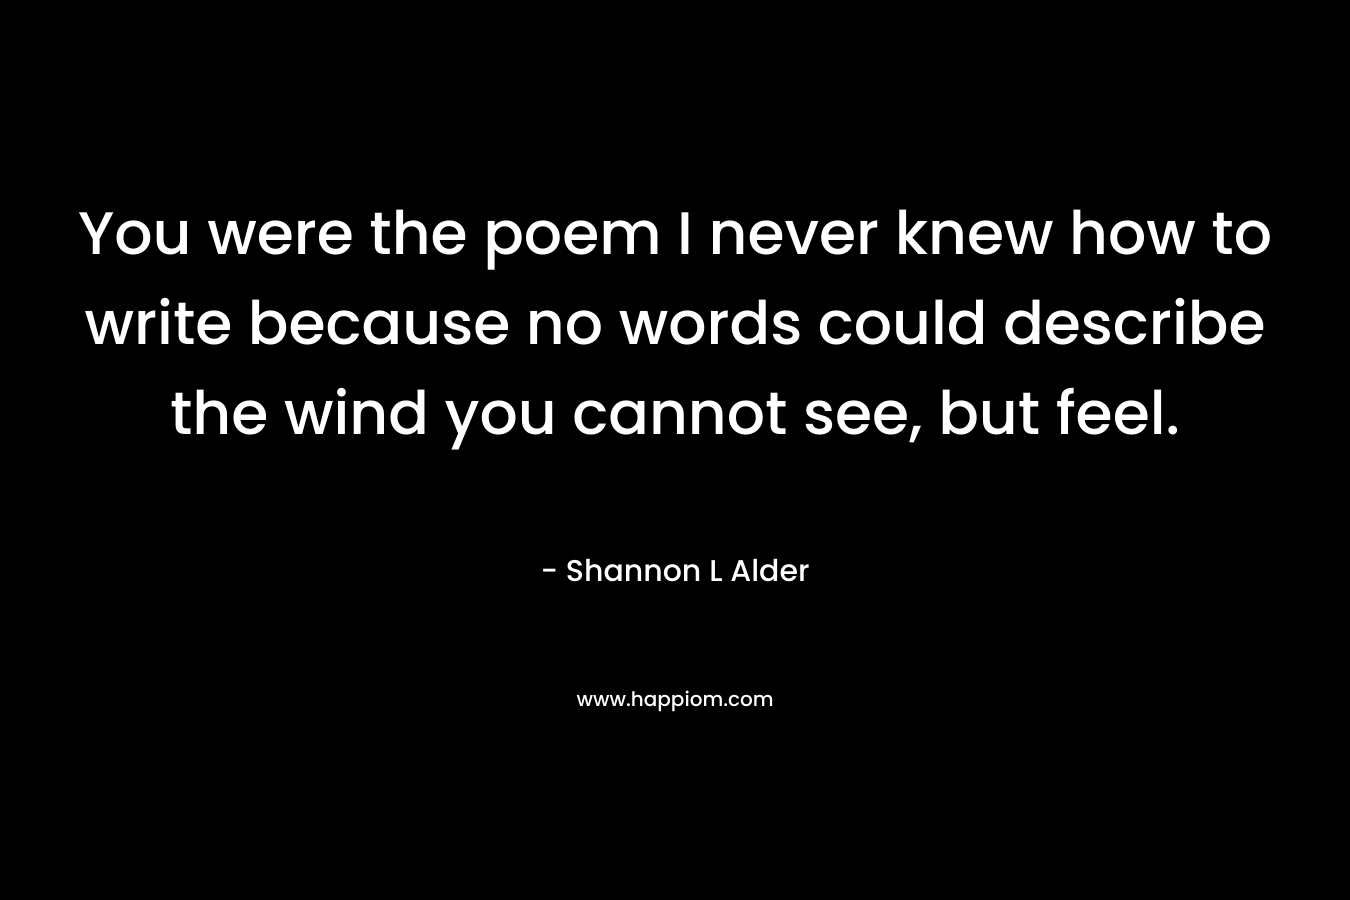 You were the poem I never knew how to write because no words could describe the wind you cannot see, but feel. – Shannon L Alder